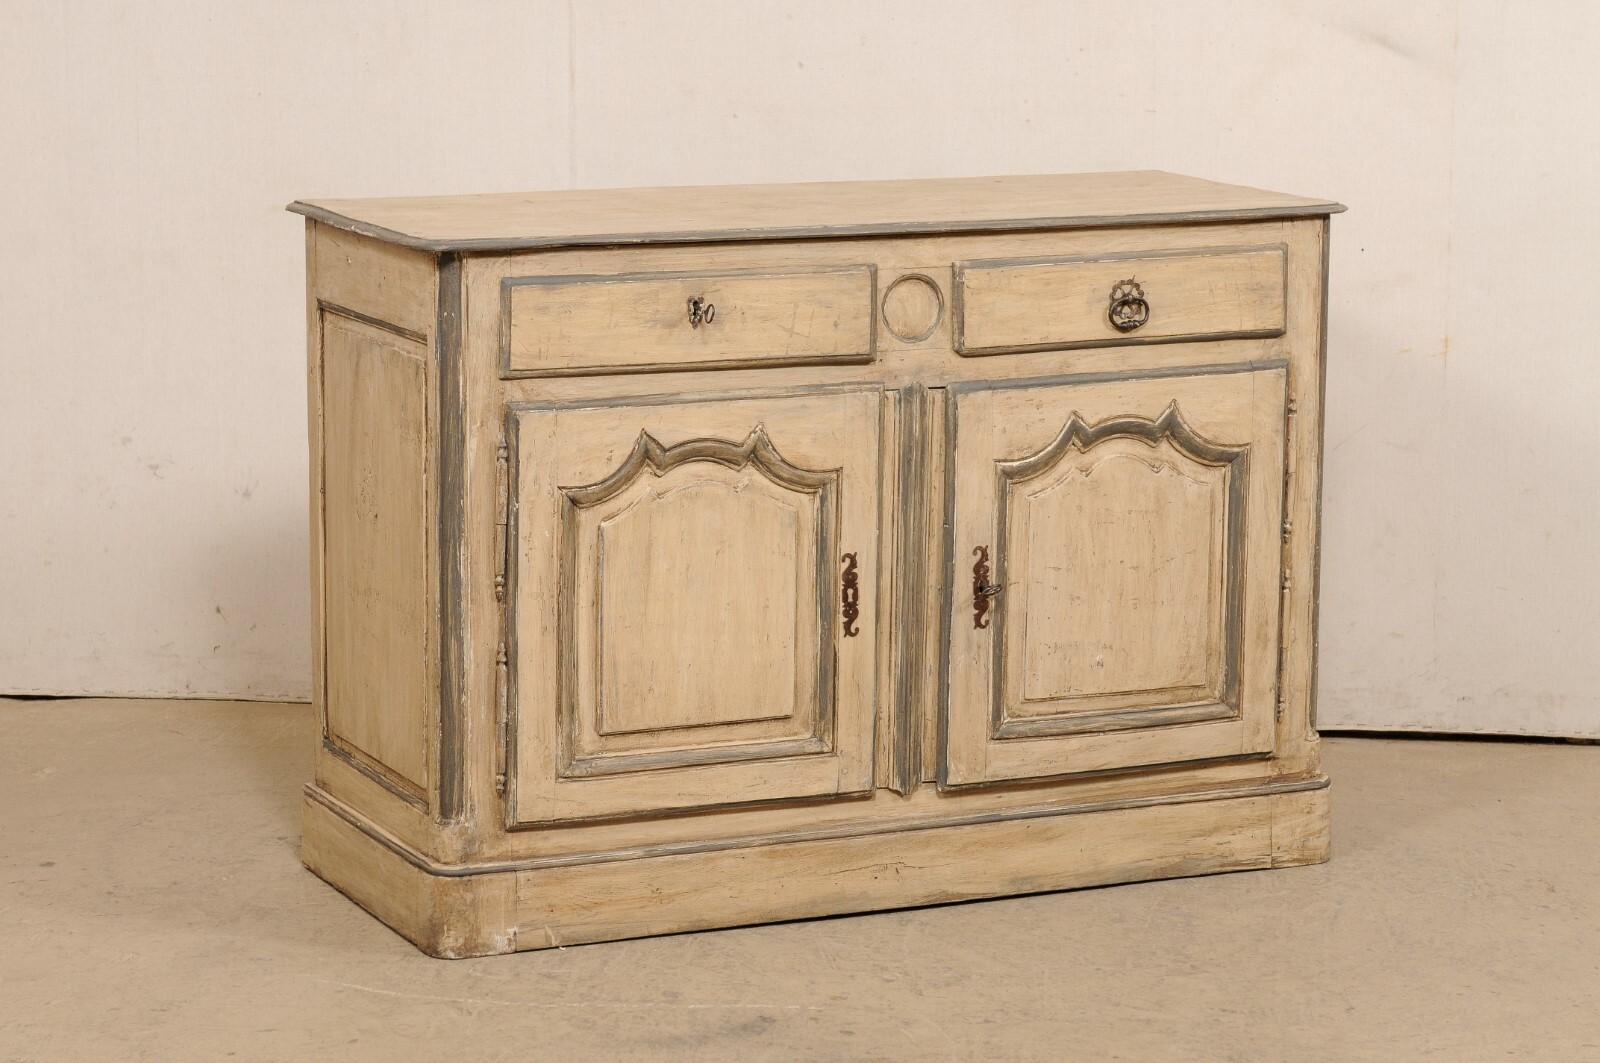 A French painted-wood, two-door buffet cabinet from the 18th century. This antique cabinet from France has a rectangular-shaped top, over a case that houses a pair of half-sized drawers at top (with a circular medallion carved at middle front,